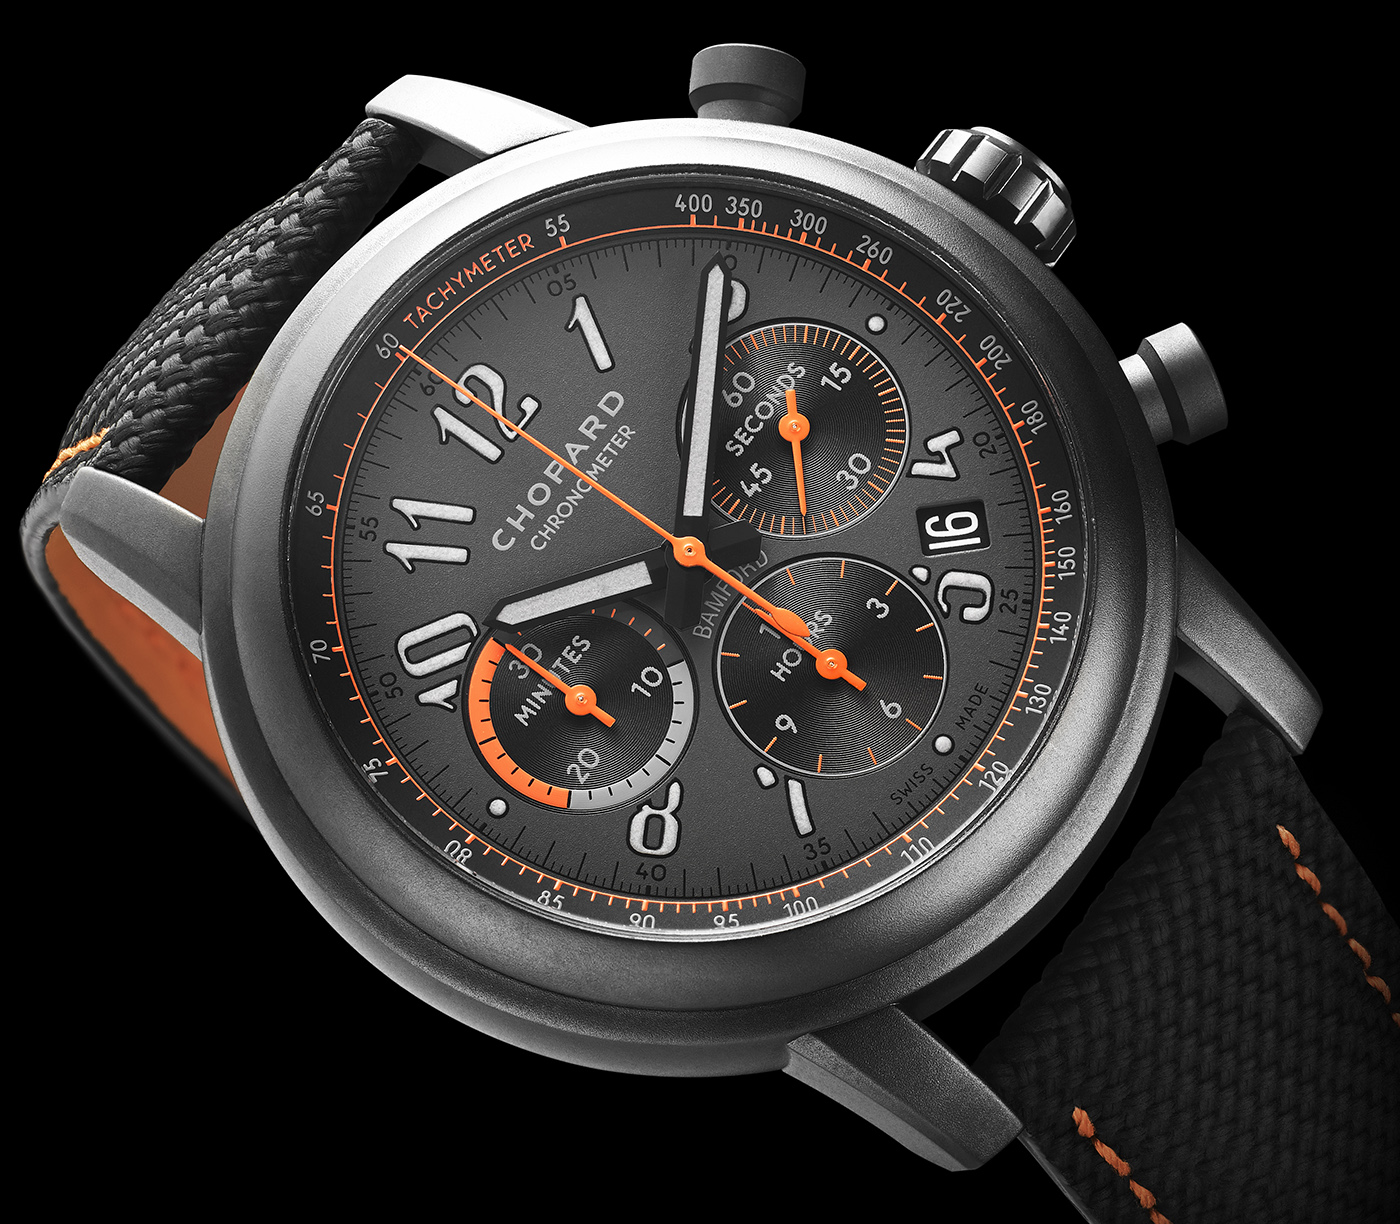 Bamford takes Chopard's Mille Miglia watch for a spin